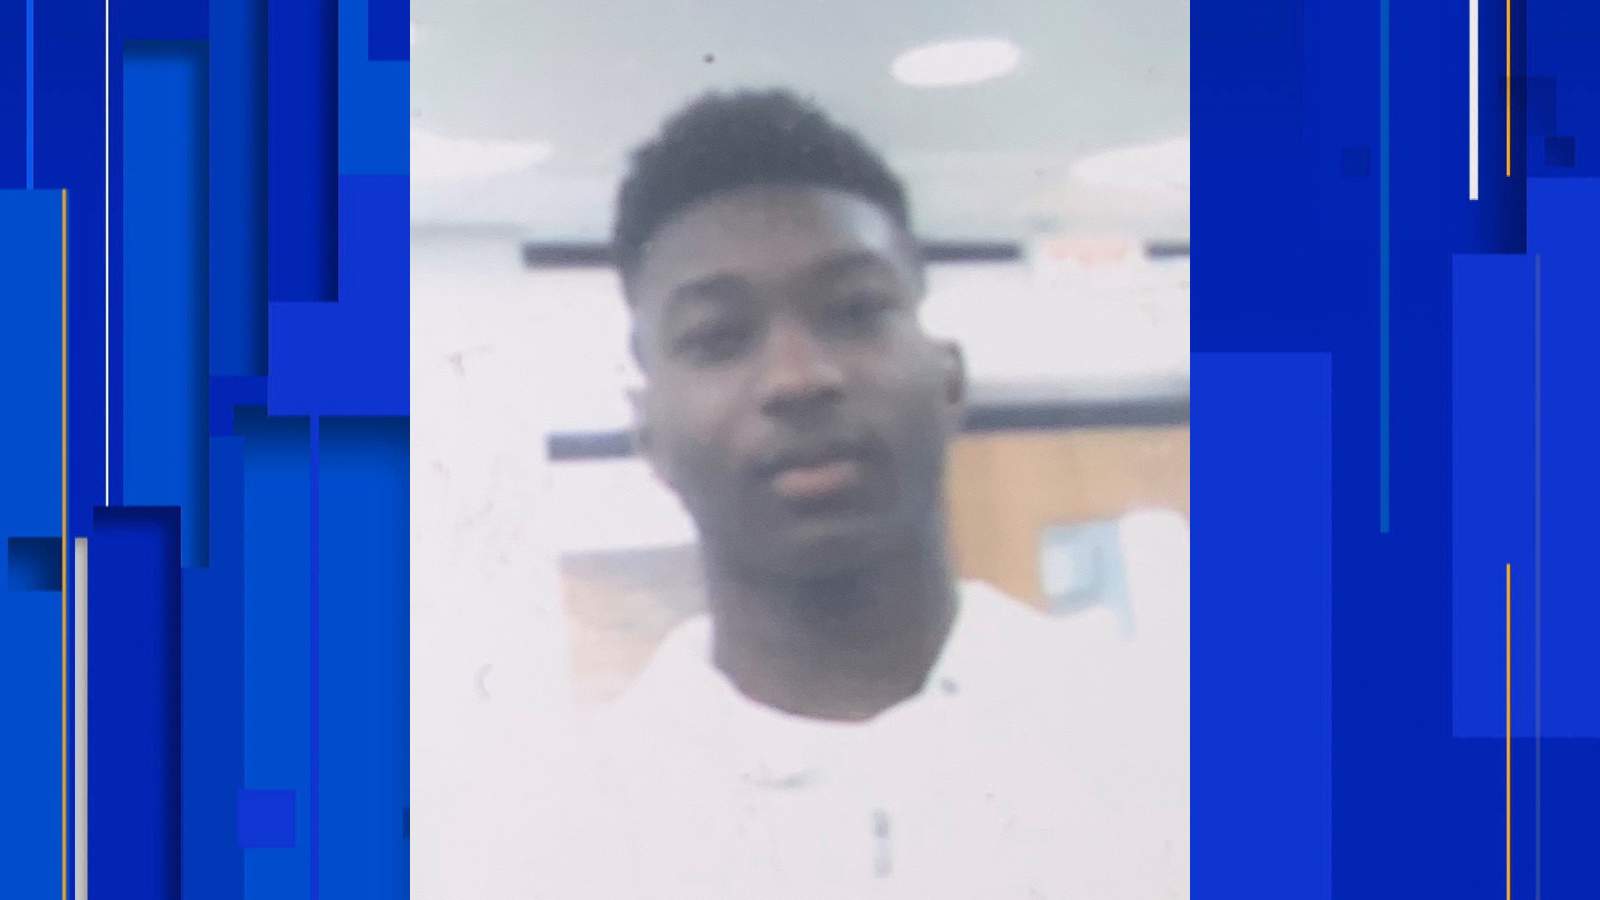 Detroit police want help finding missing 16-year-old boy